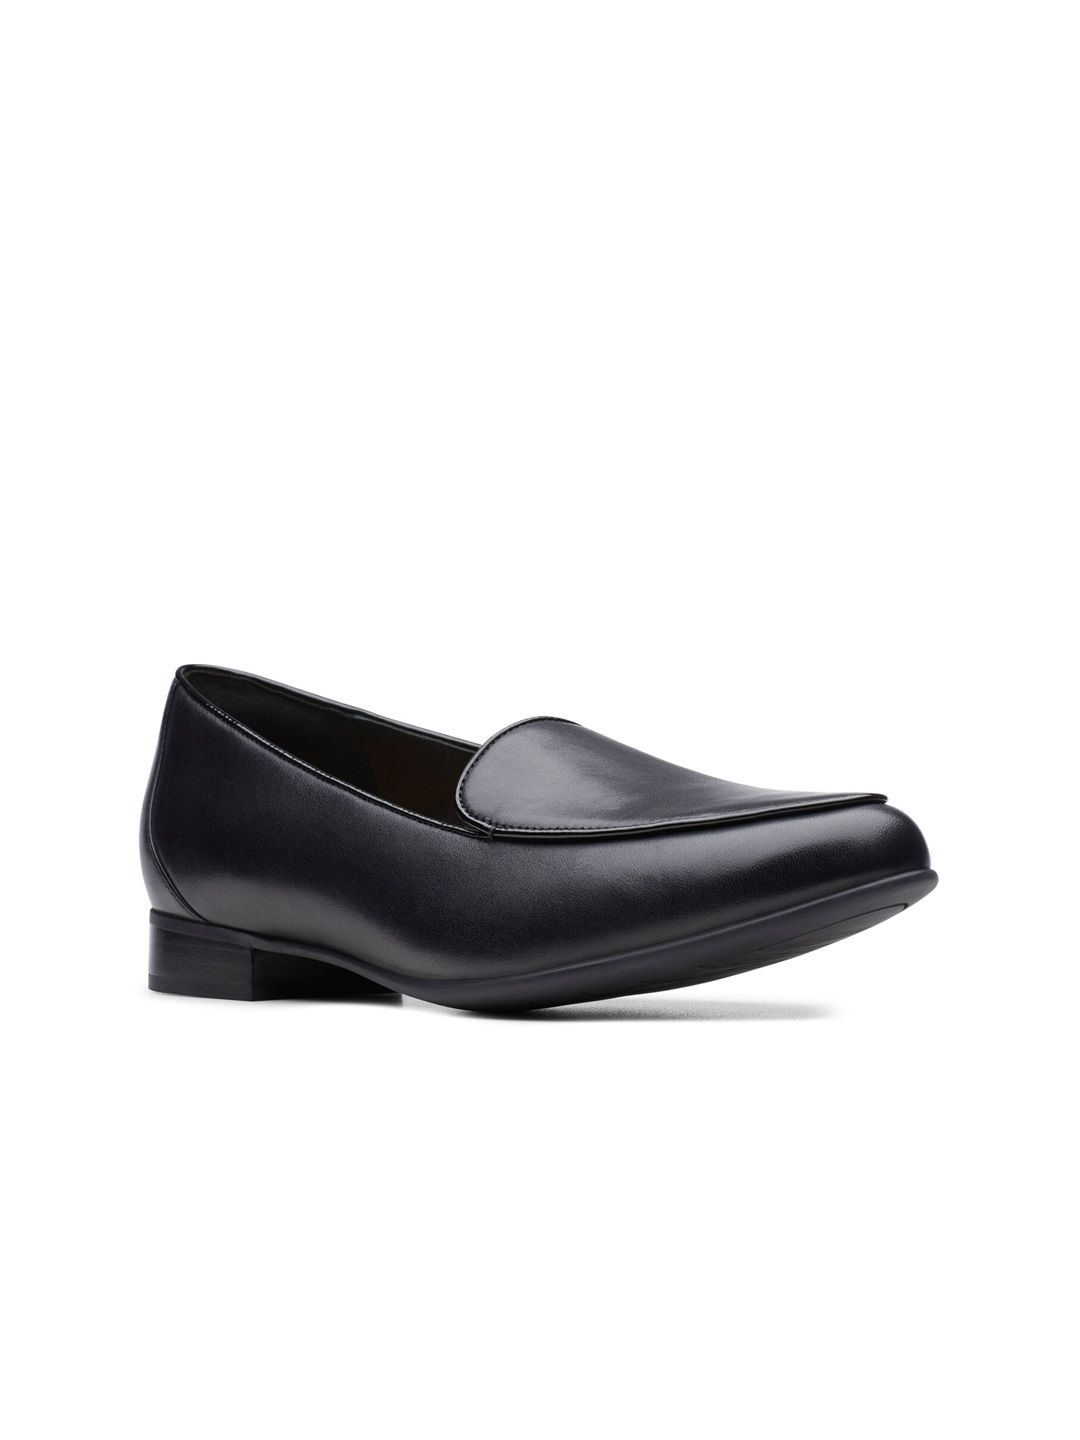 Clarks Women Black Leather Loafers Price in India